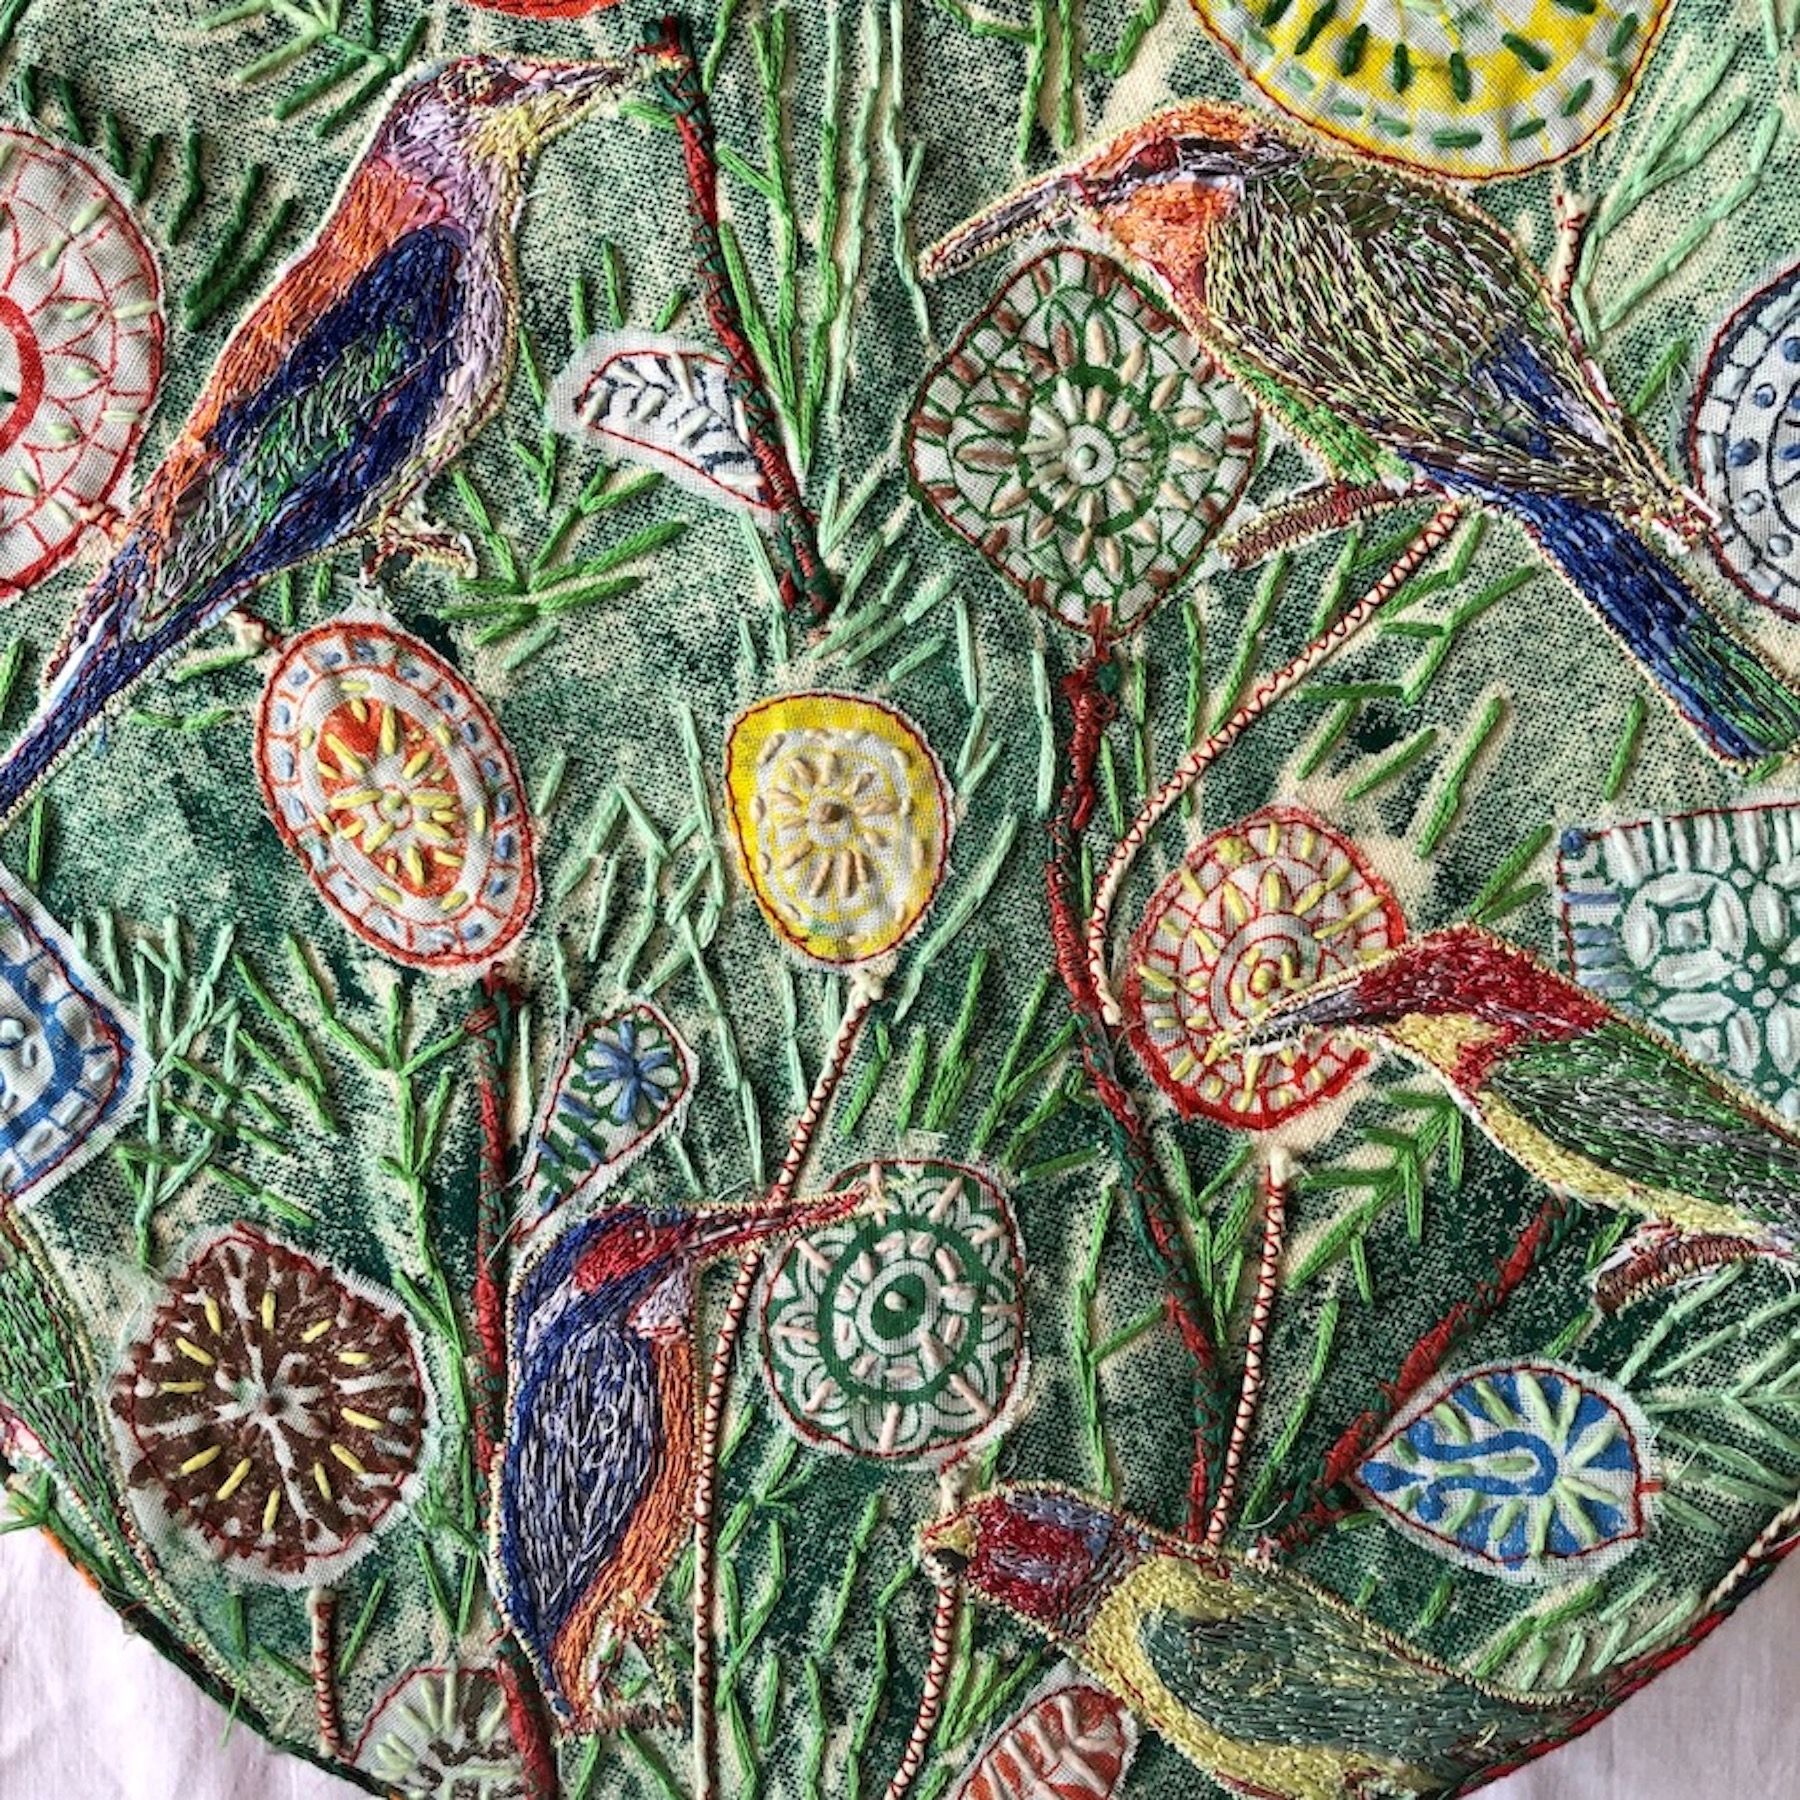 It is all in the detail - a snapshot view of one of Kelly's beautiful nature inspired pieces - we wonder what her exhibition will hold